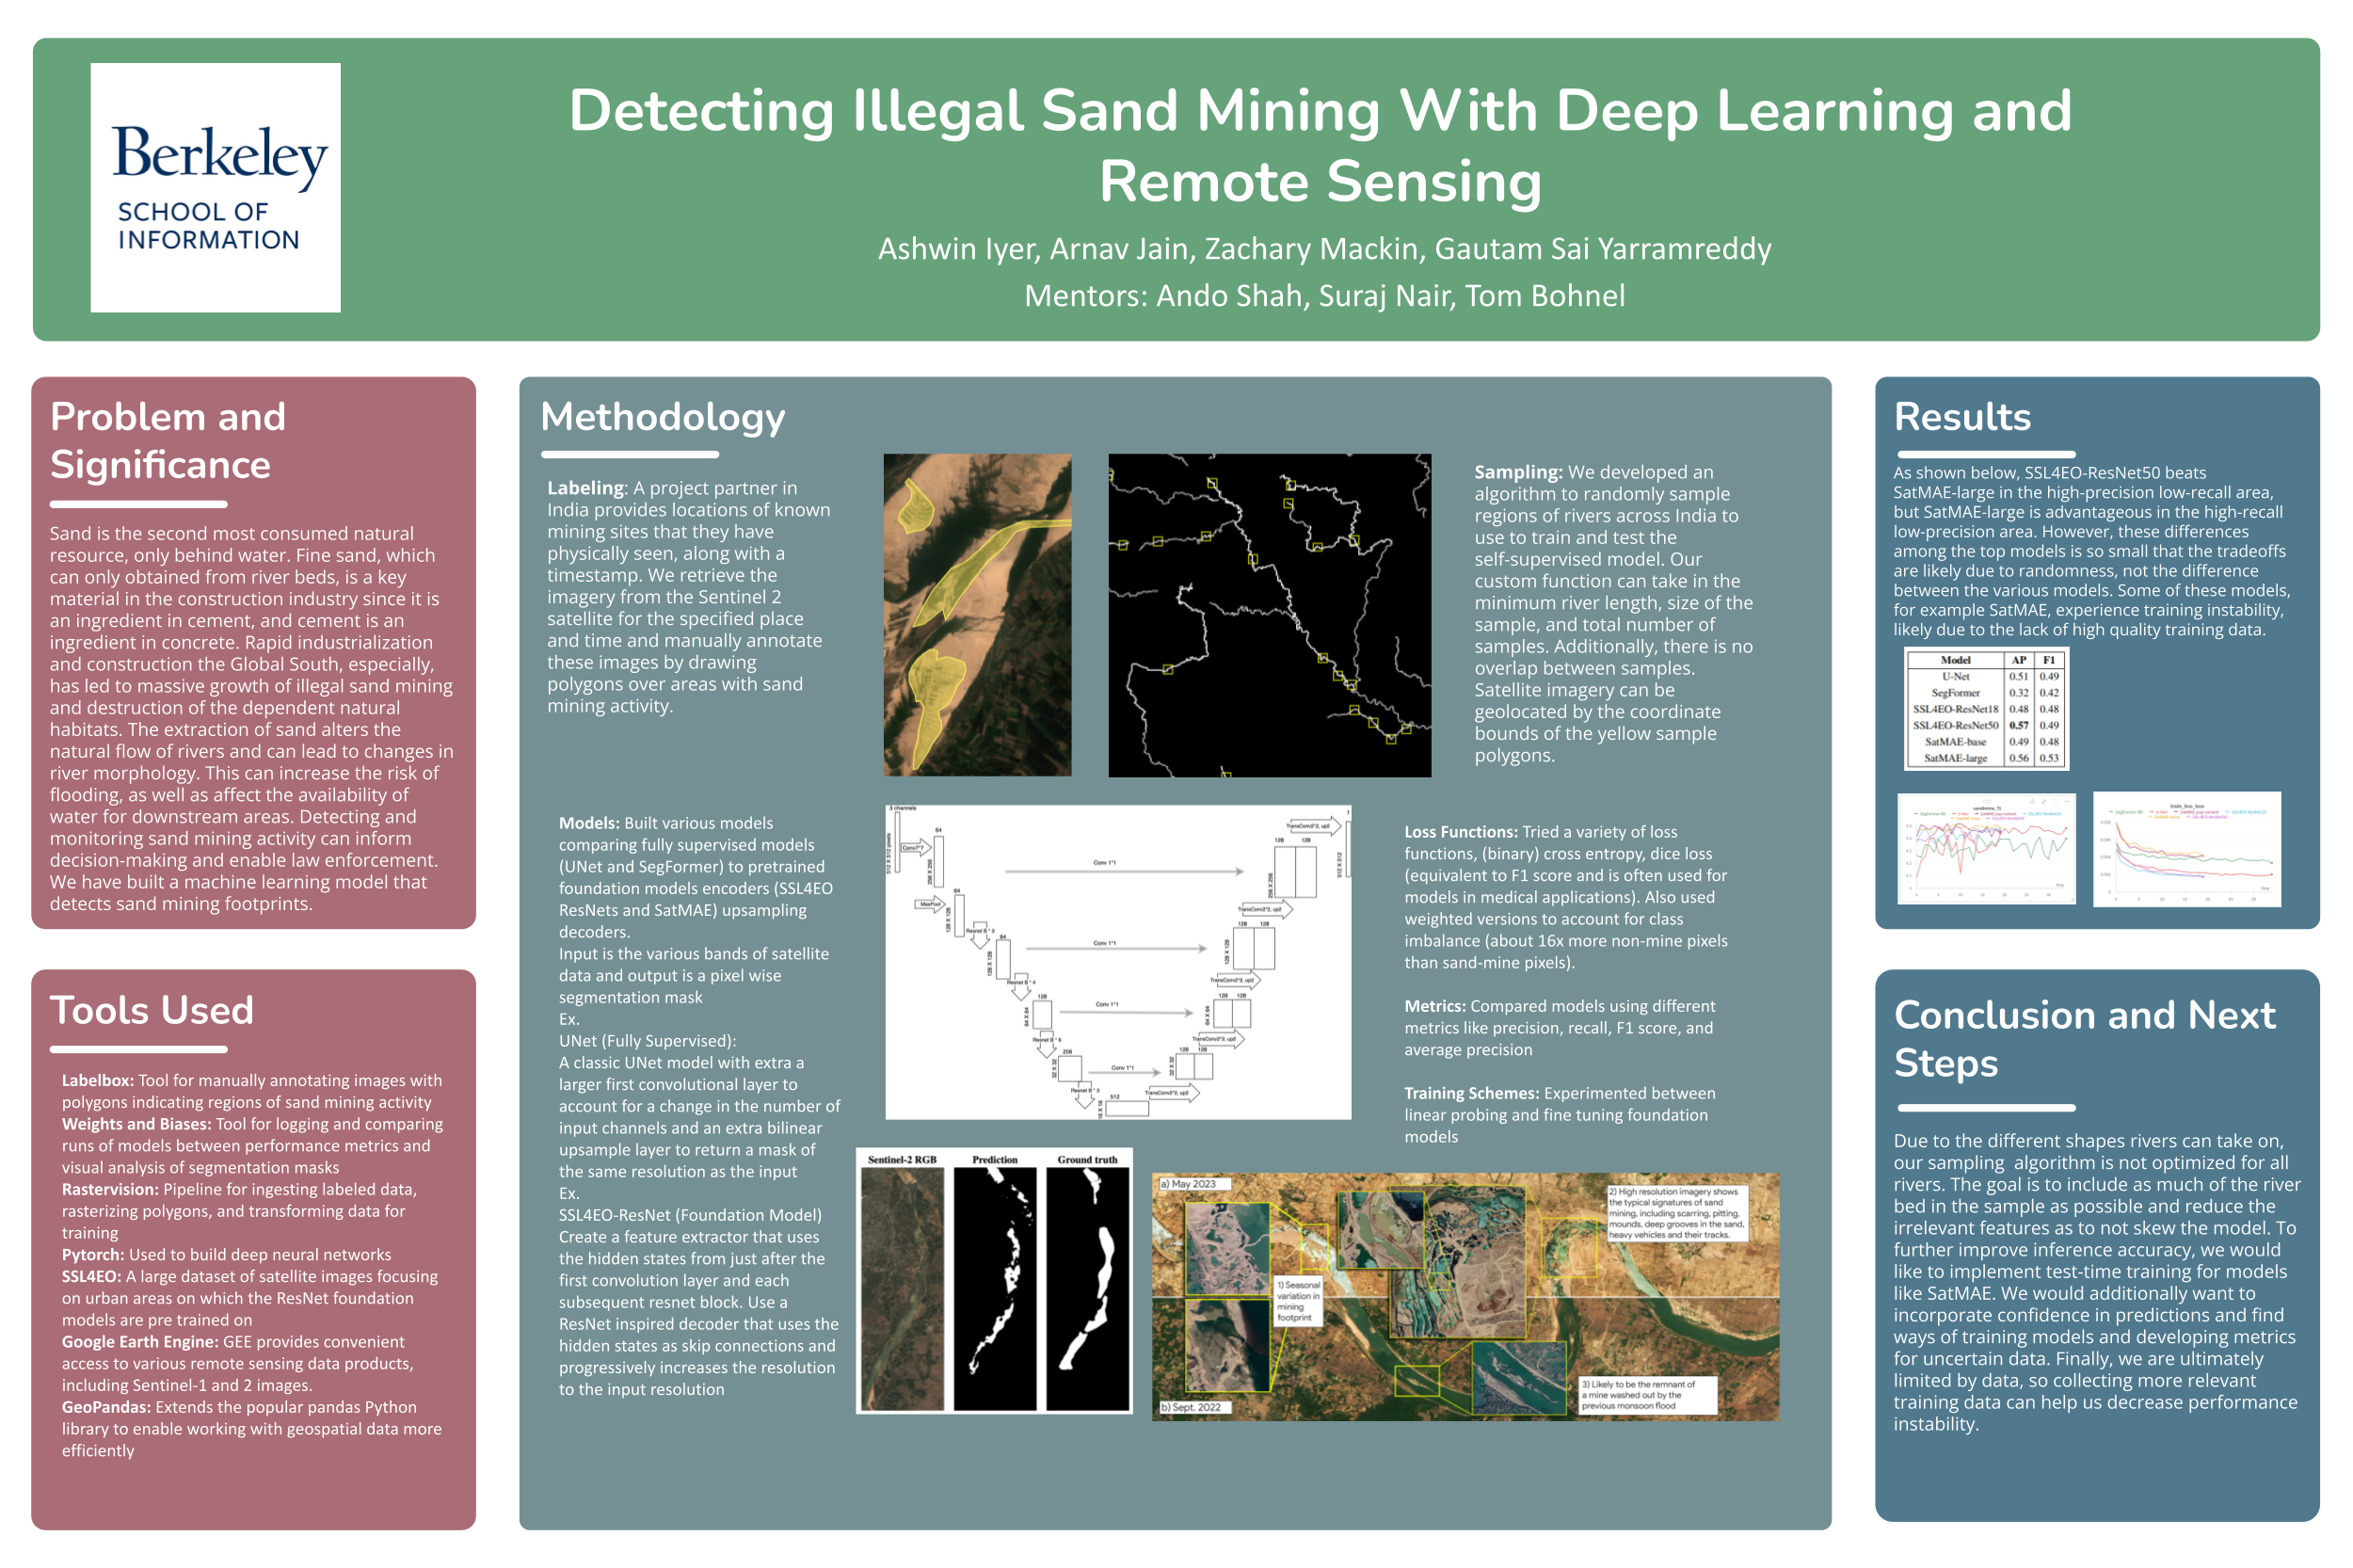 I-School: Detecting Illegal Sand Mining With Deep Learning and Remote Sensing